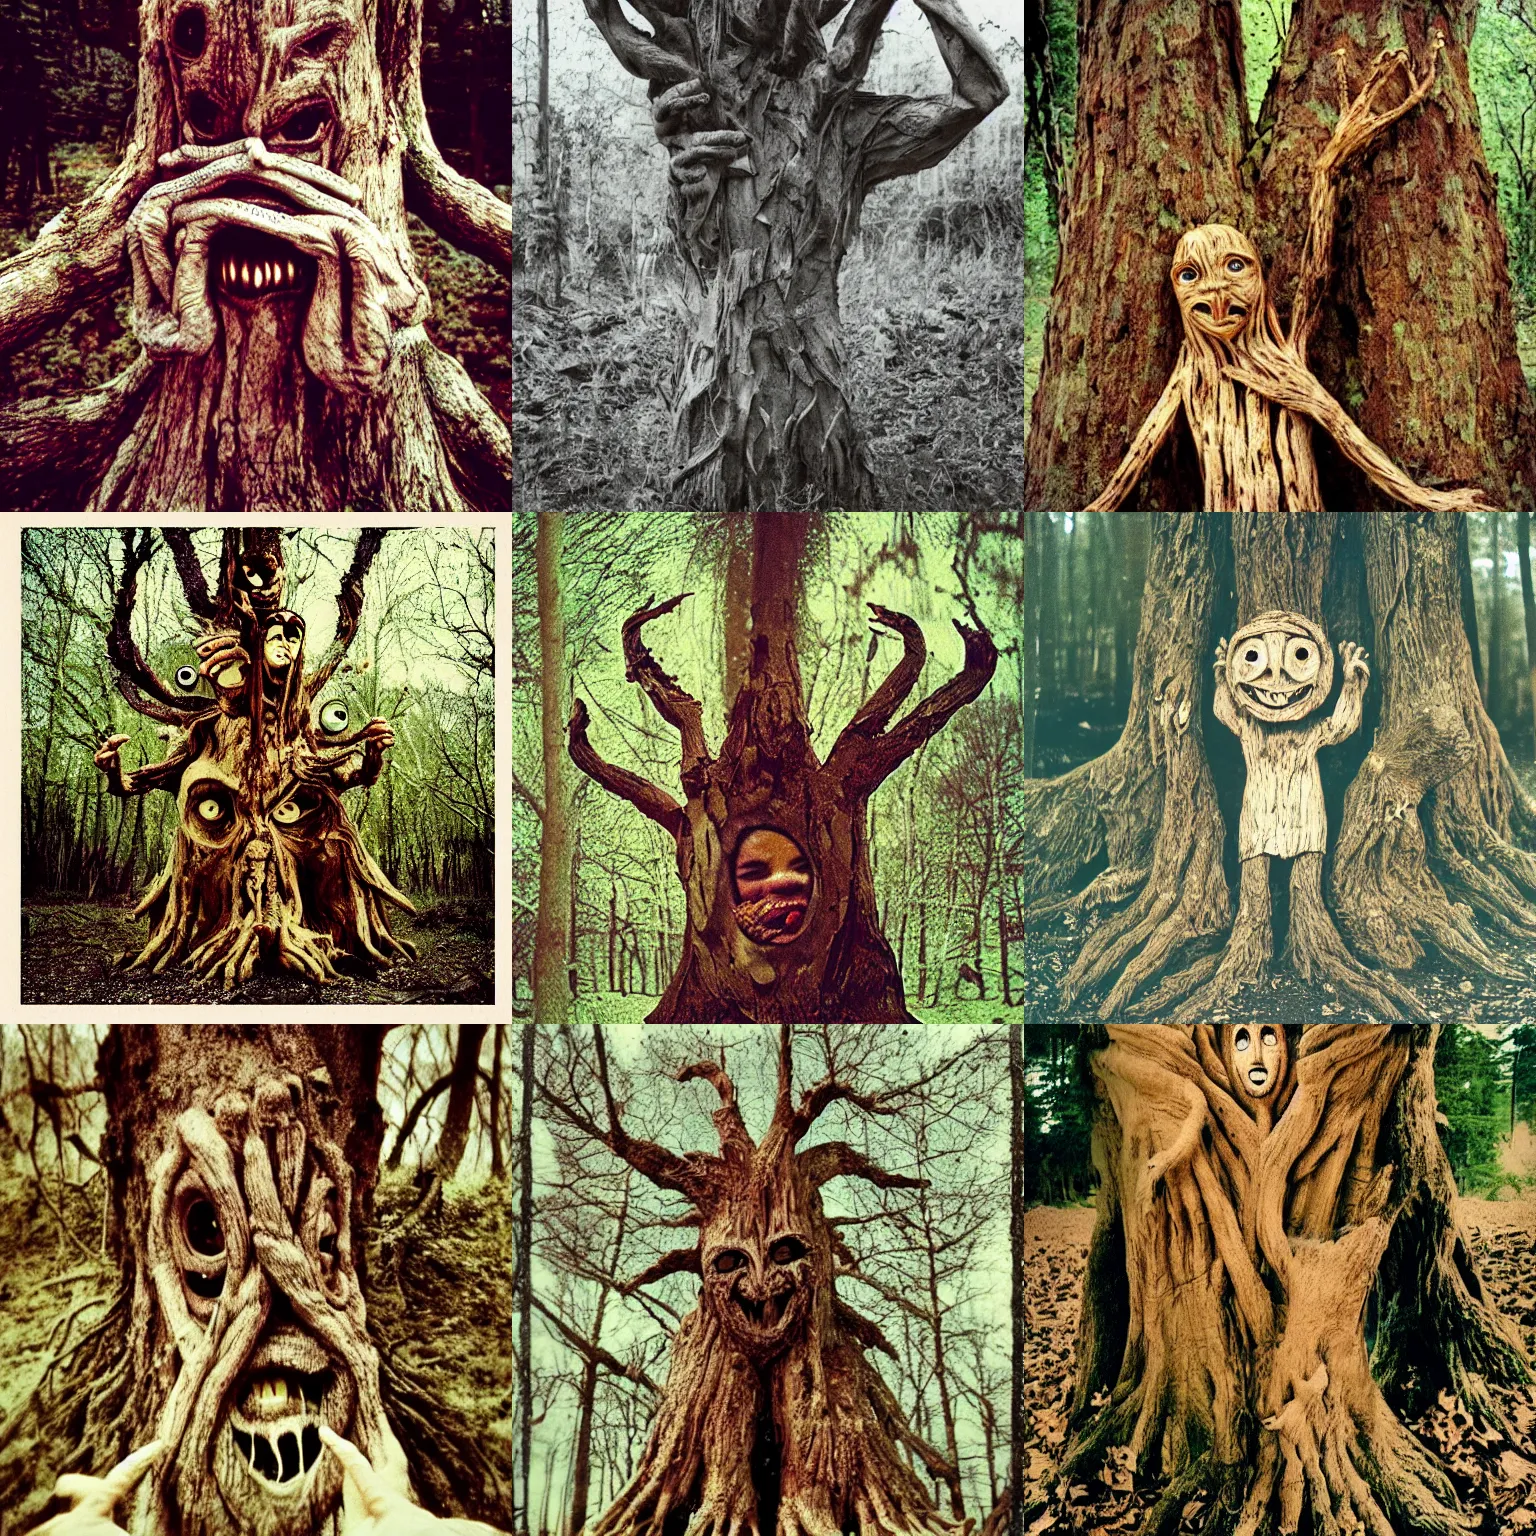 Prompt: a terrifying tree monster with distorted faces made of bark, eating mushrooms, lovecratftian horror, pans labyrinth, shot on expired instamatic film